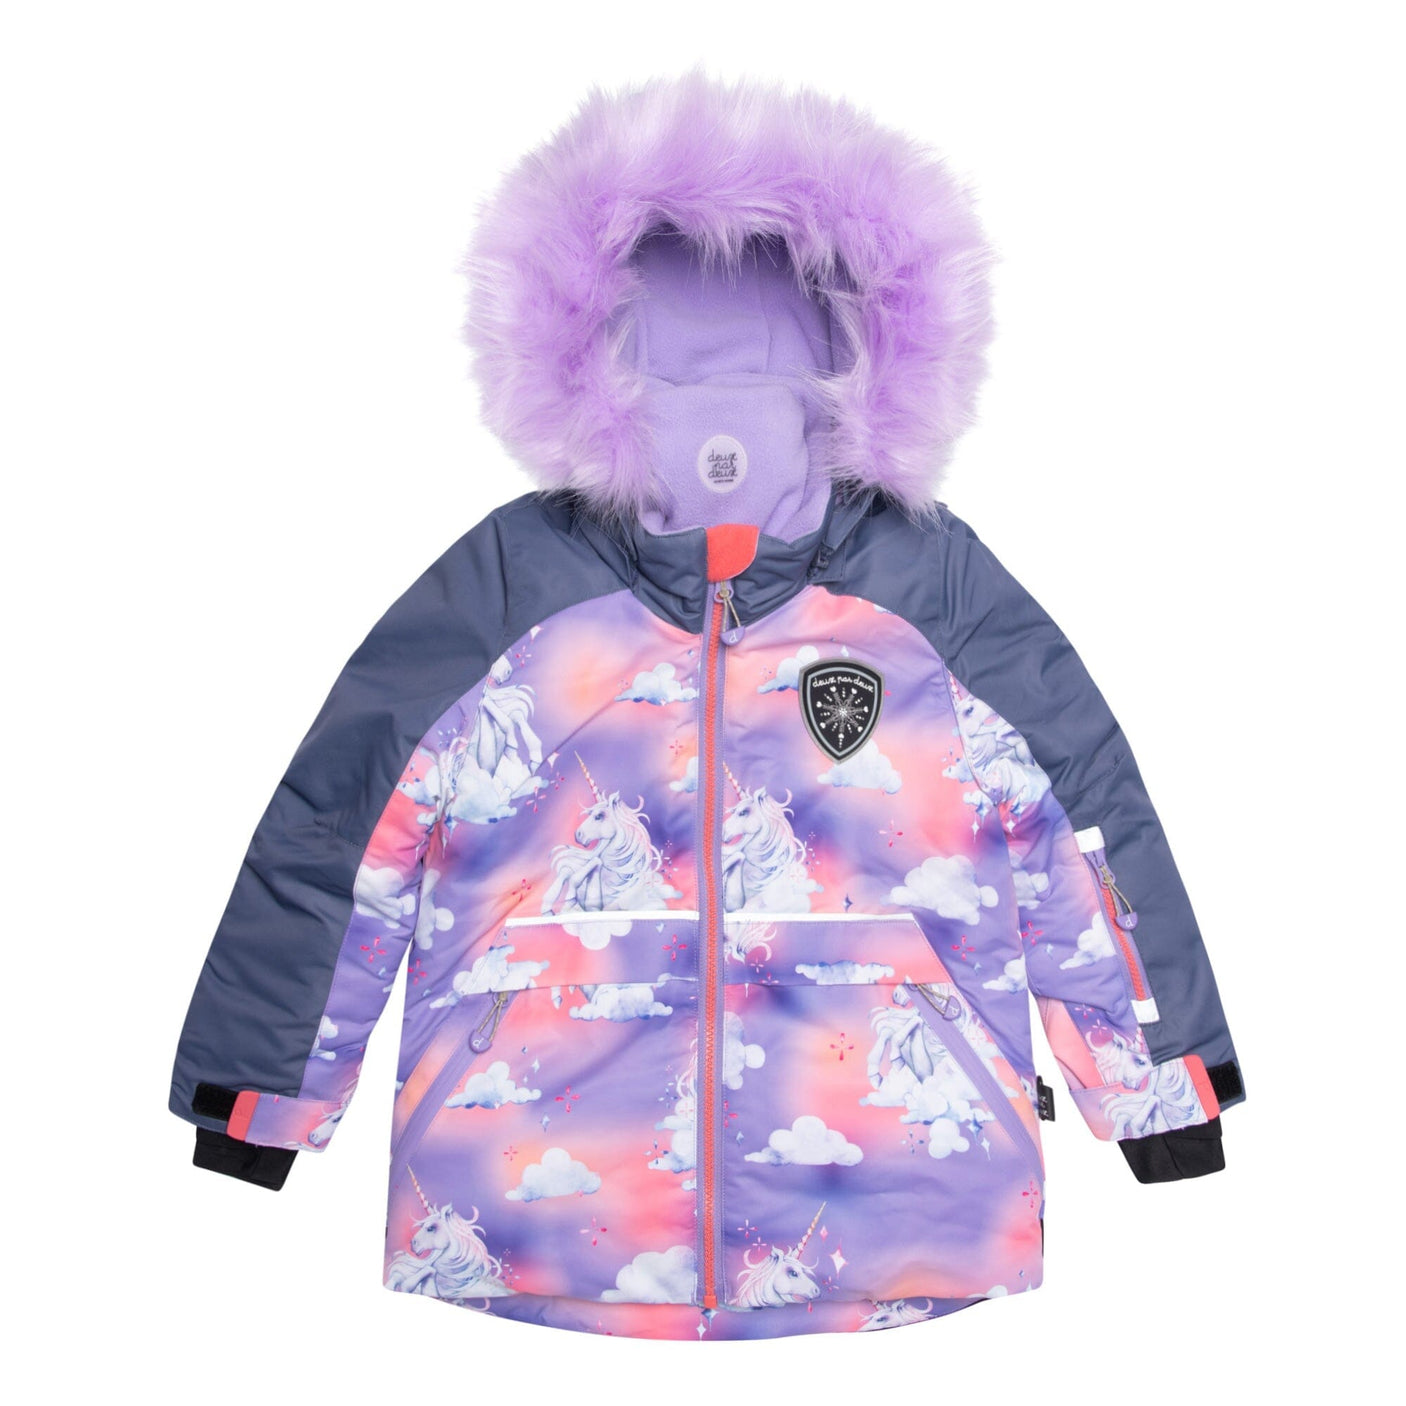 Two Piece Snowsuit Lavender With Unicorns In The Clouds Print-3